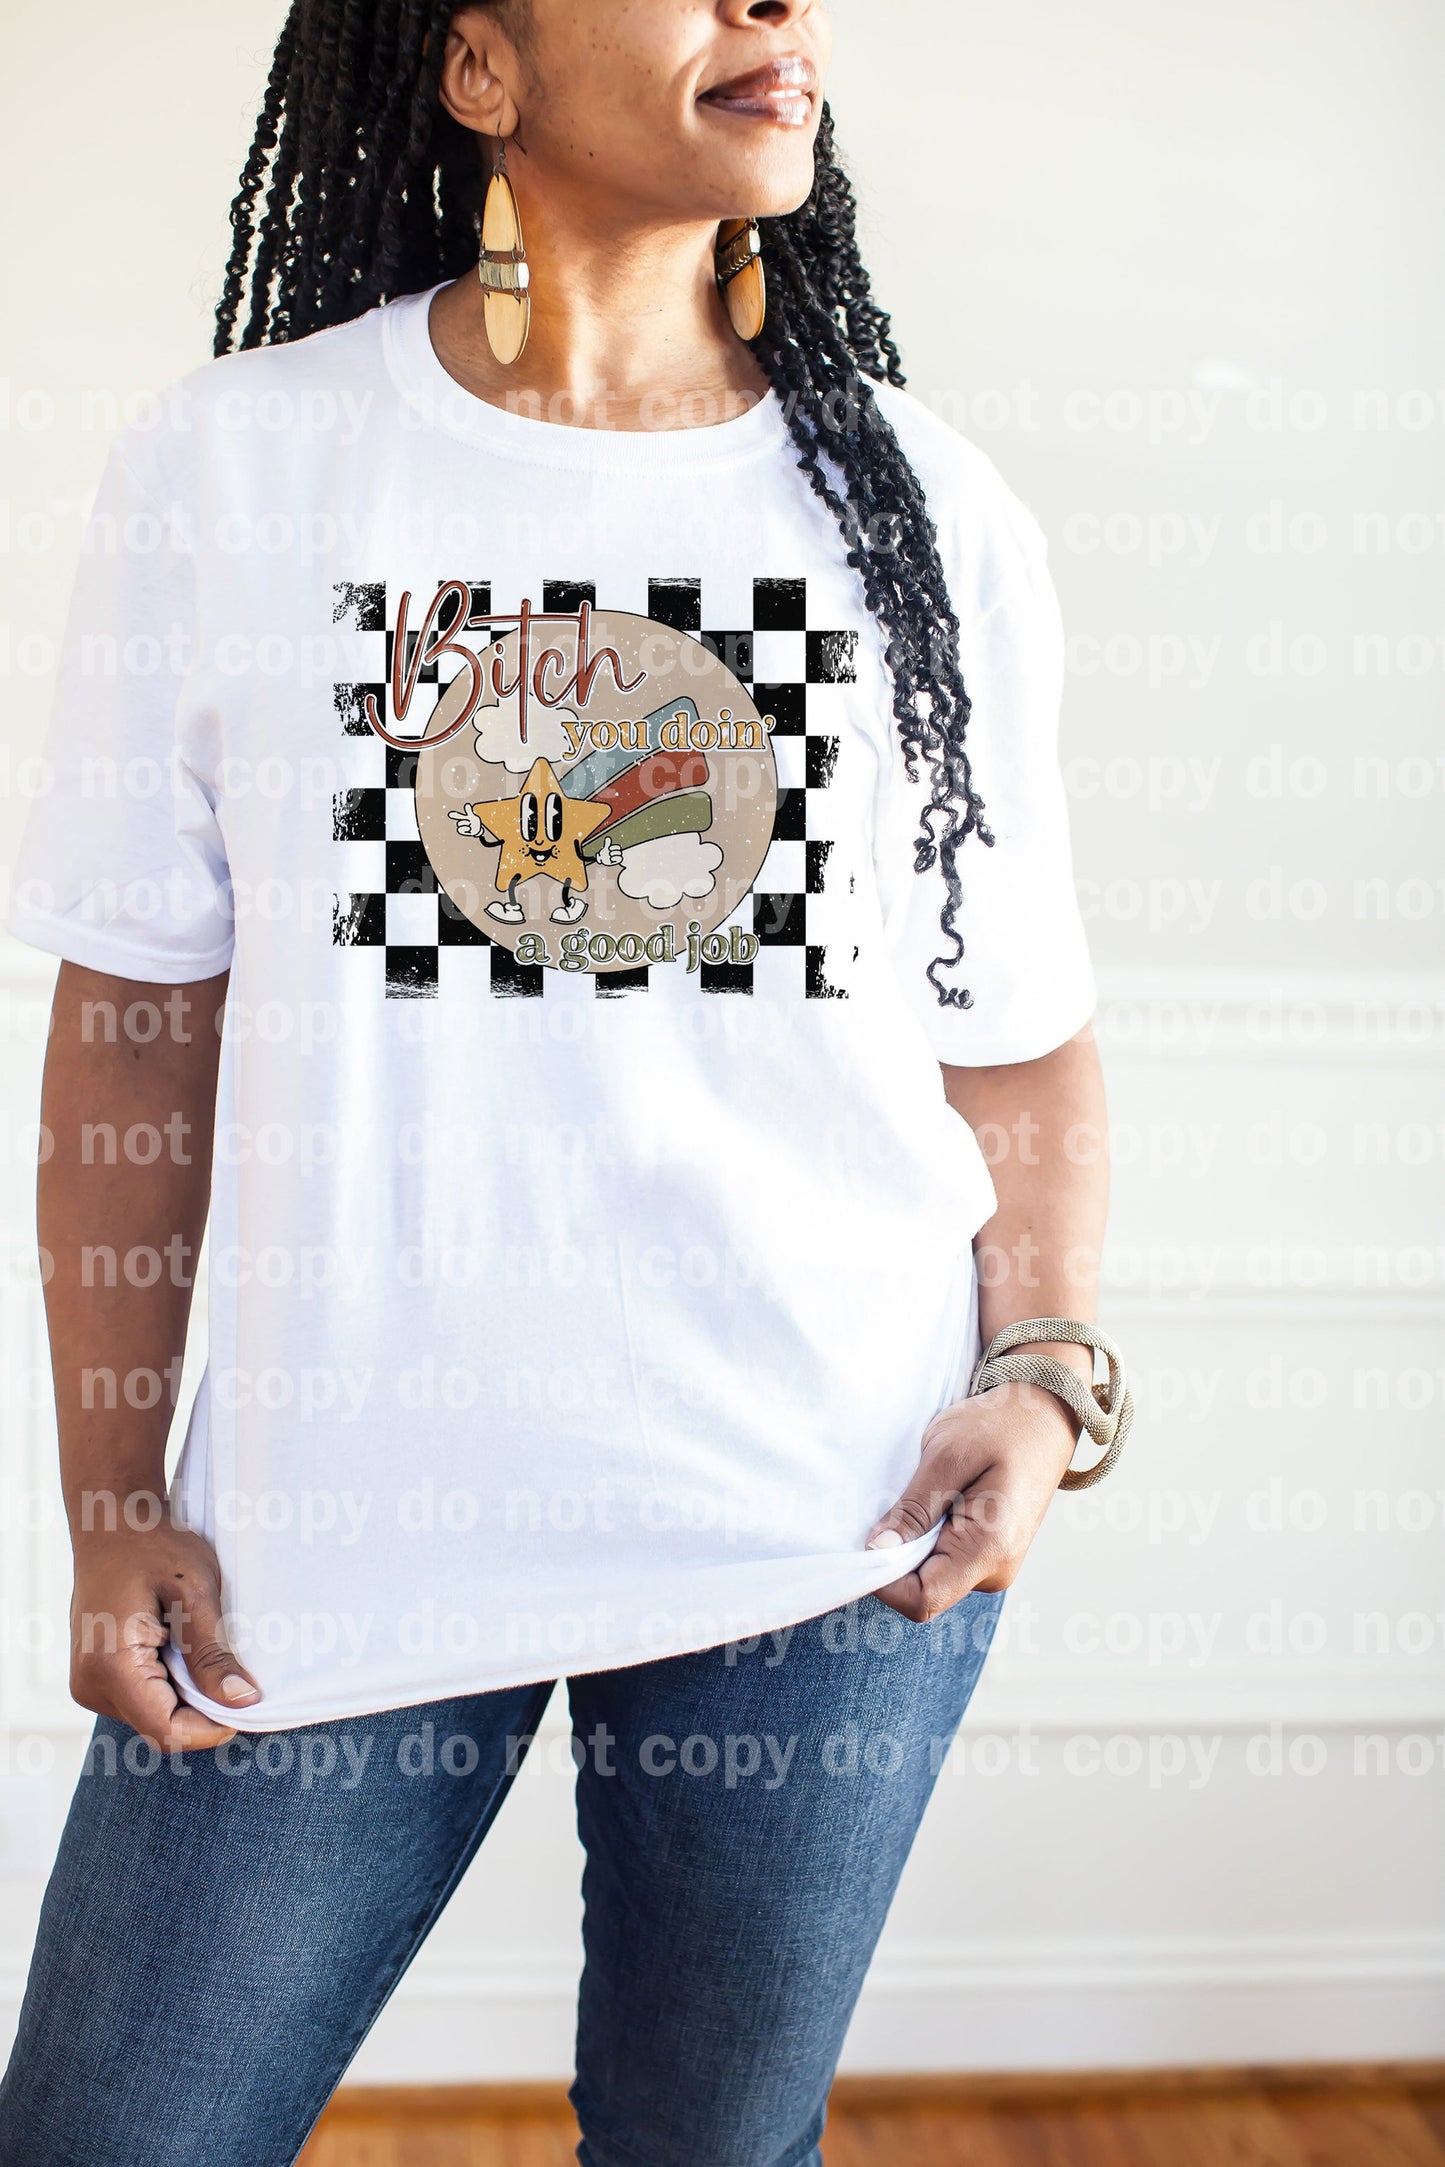 Bitch You Doin' A Good Job Distressed Dream Print or Sublimation Print